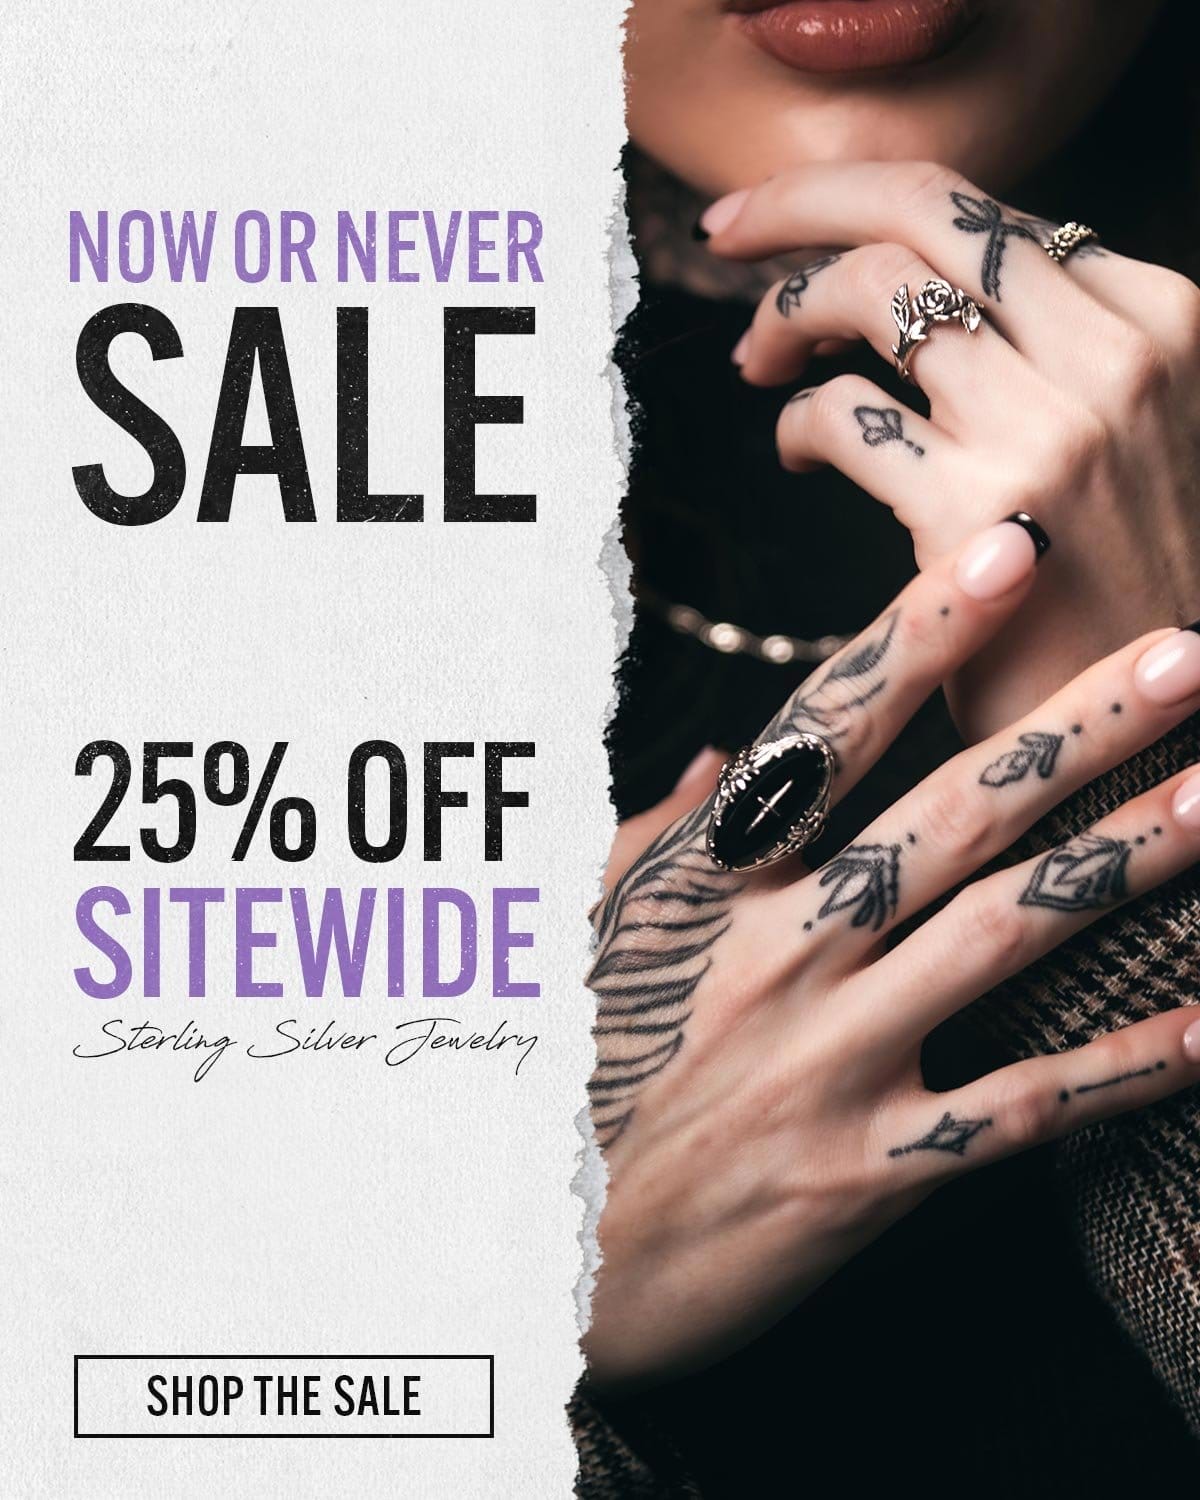 The Now or Never Sale